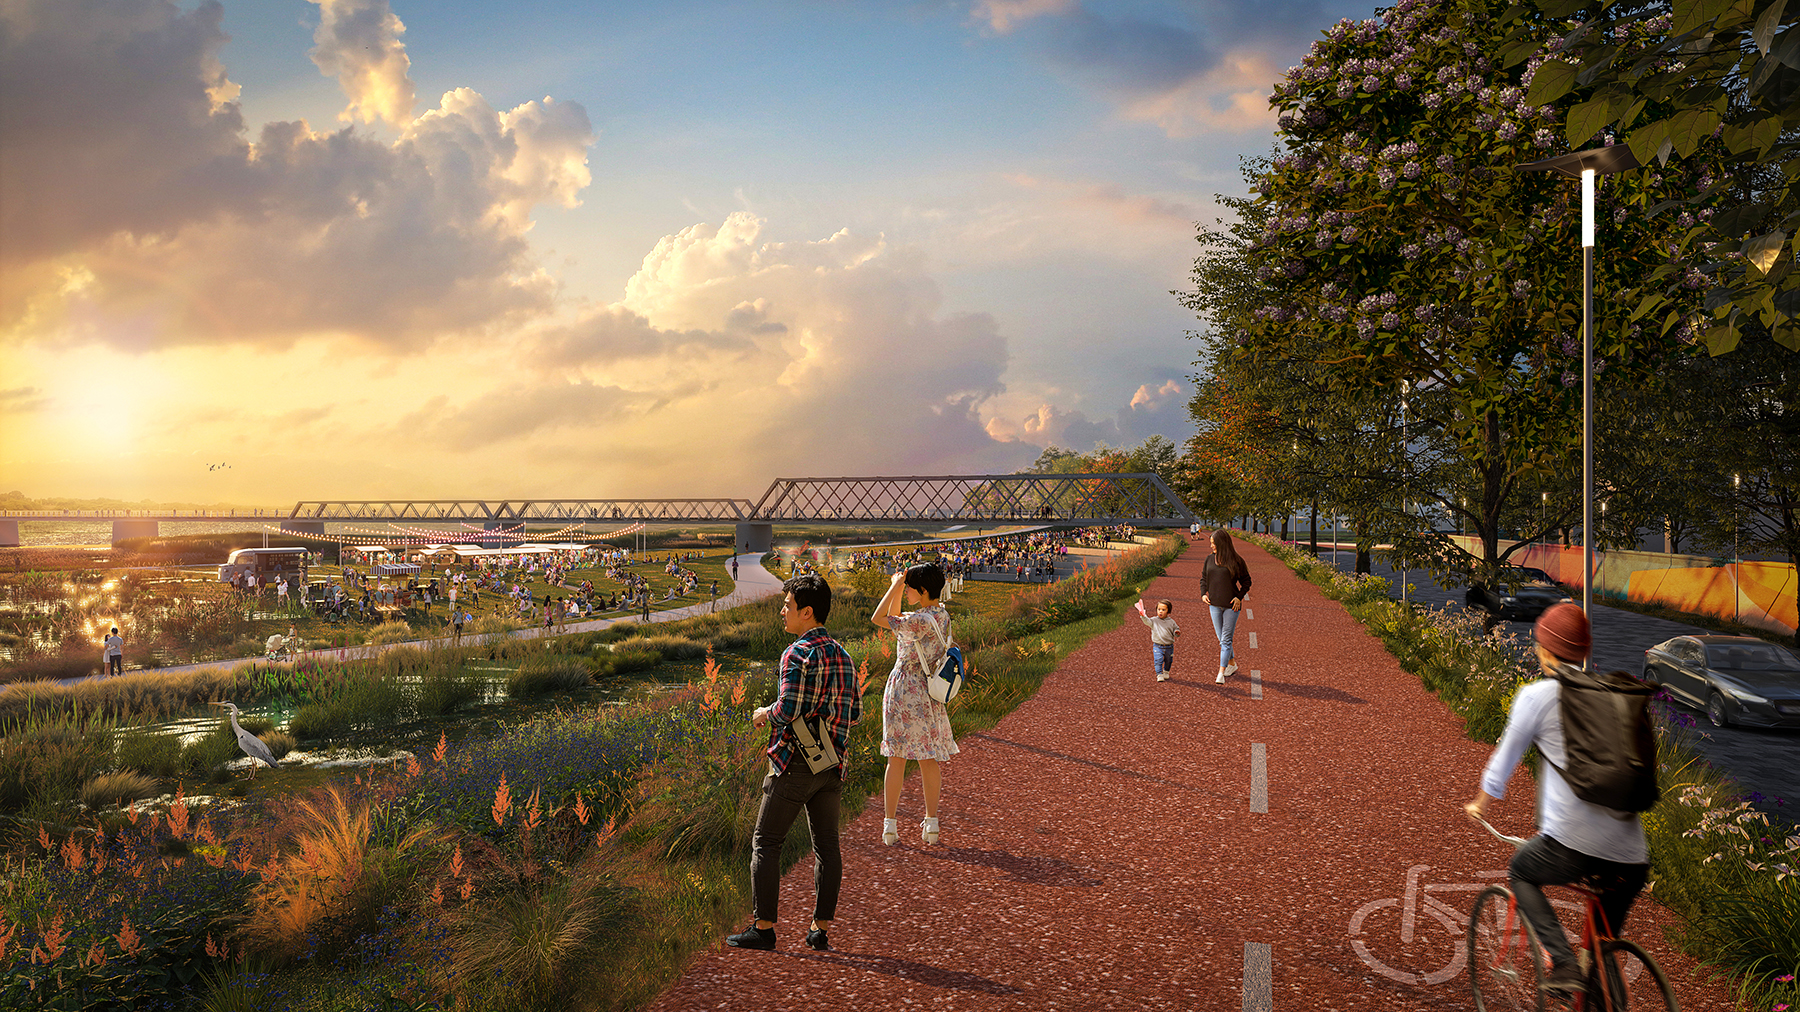 The master plan for Huwei calls for adding trails along the dike that separates the town from the Beigang River and creating sports fields and other amenities in between the dike and the river. (Image courtesy of MVRDV)